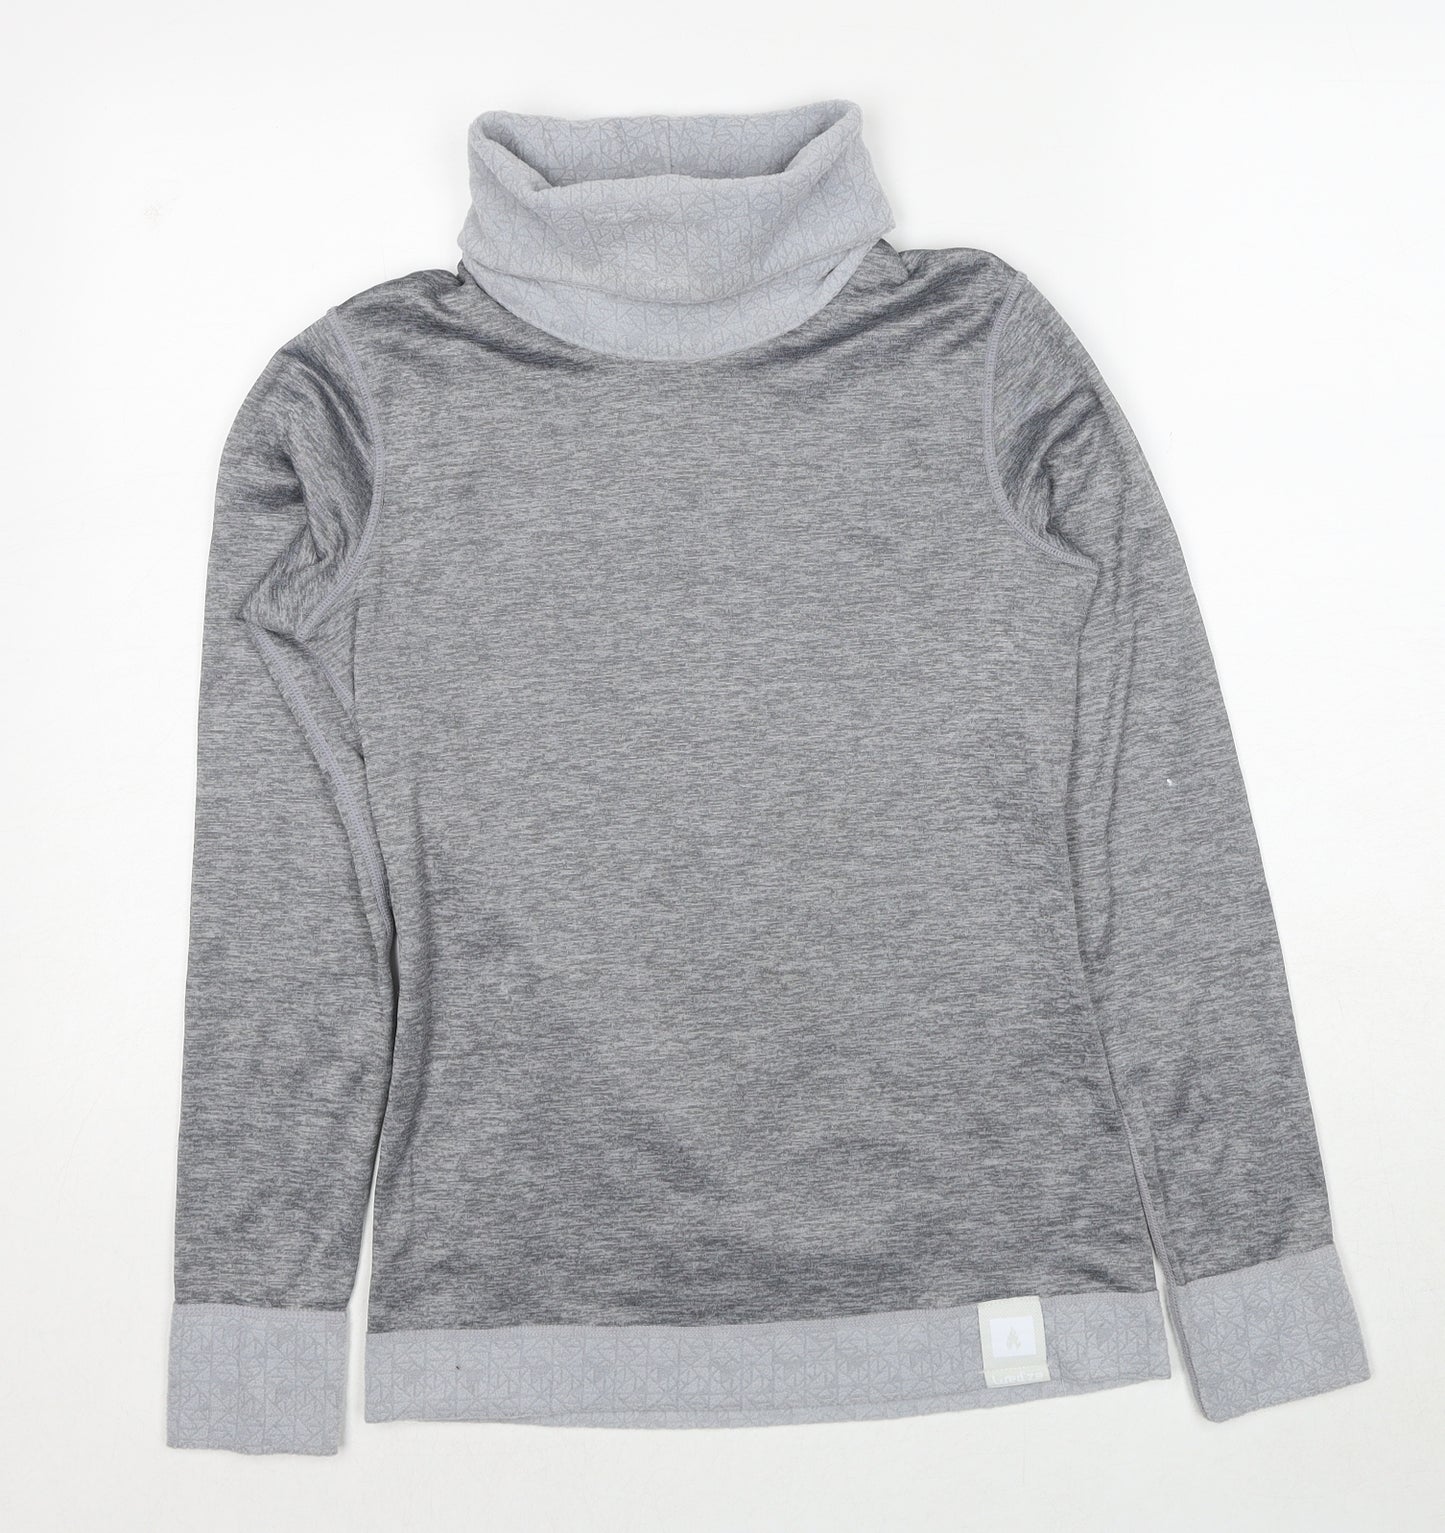 DECATHLON Womens Grey Polyester Basic T-Shirt Size XS Roll Neck Pullover